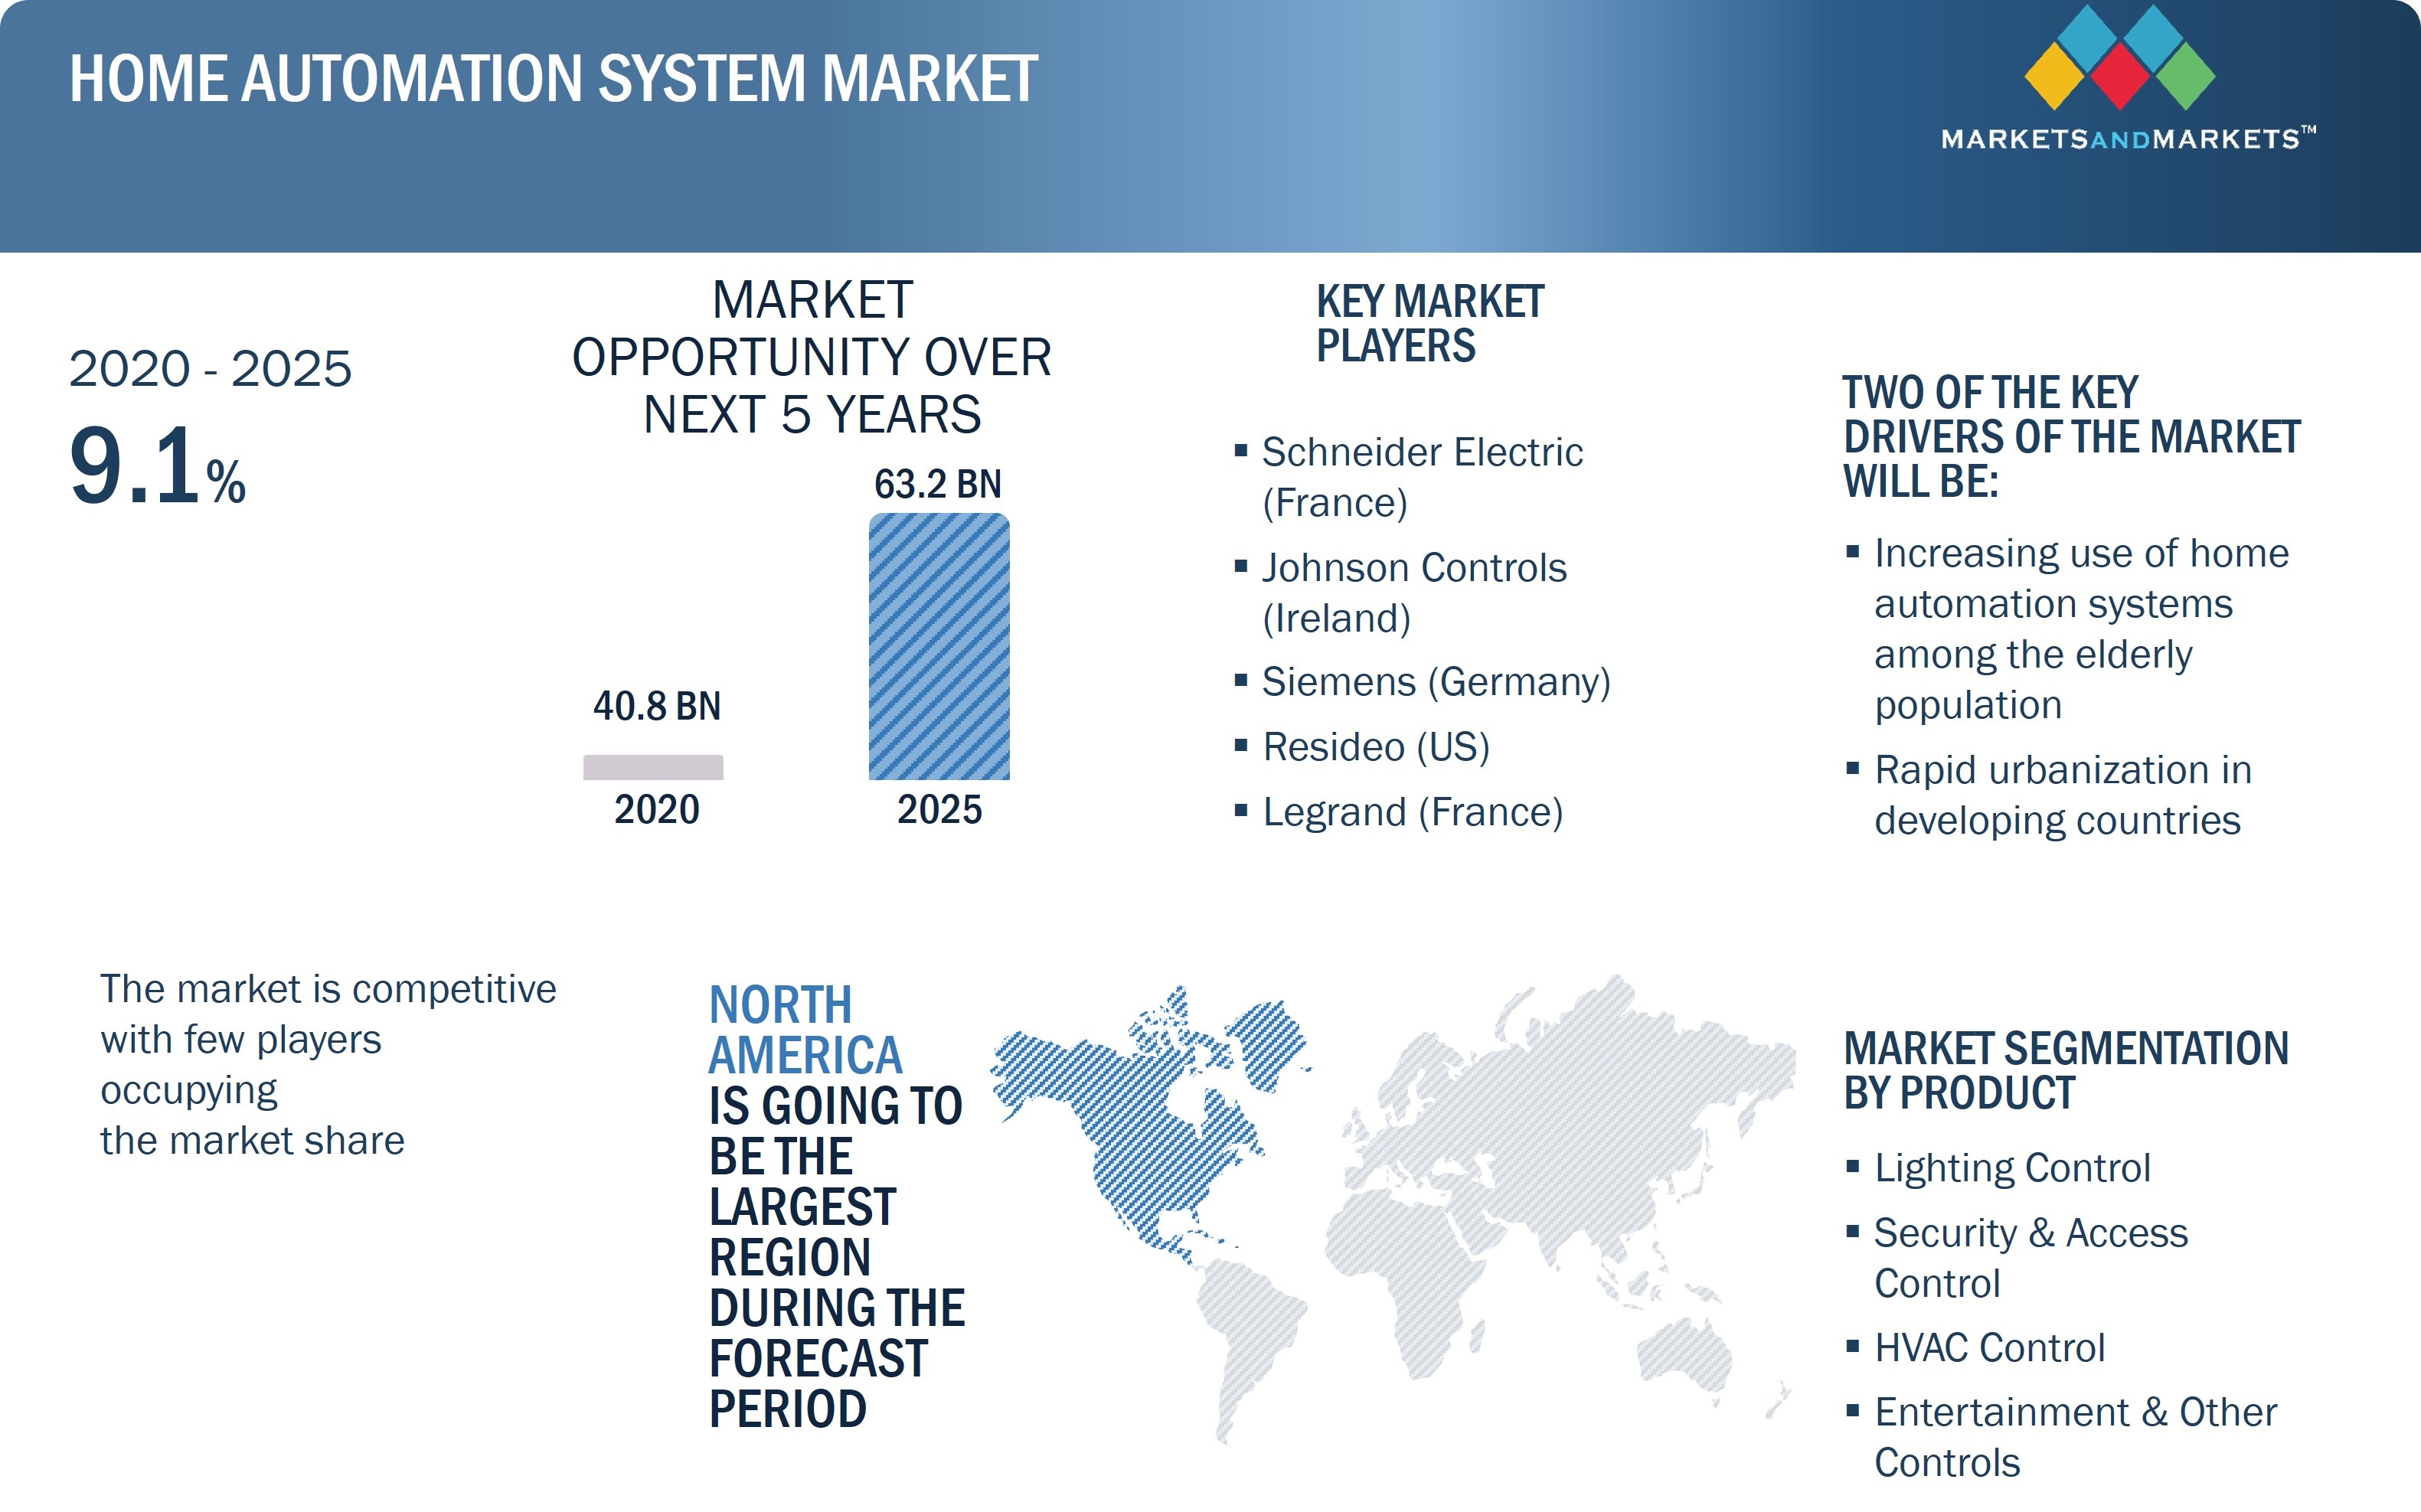 IHome Automation System Market by Highlights